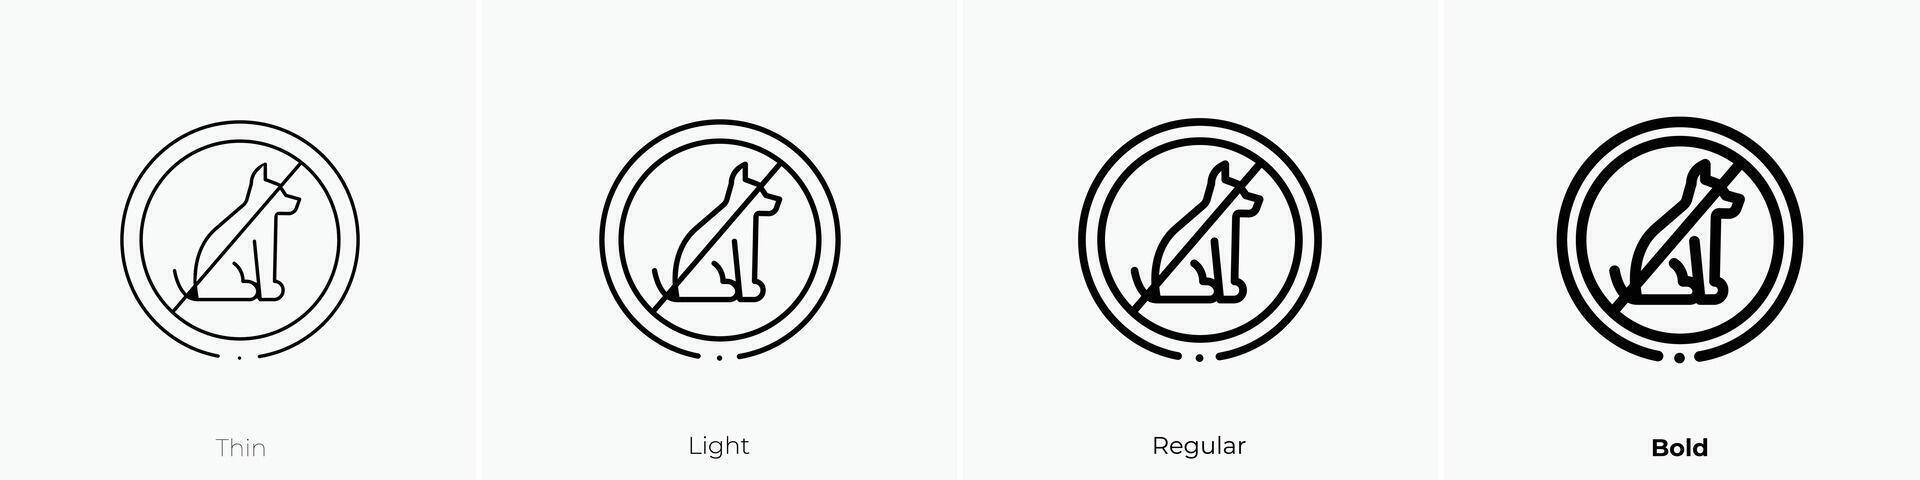 no pets icon. Thin, Light, Regular And Bold style design isolated on white background vector